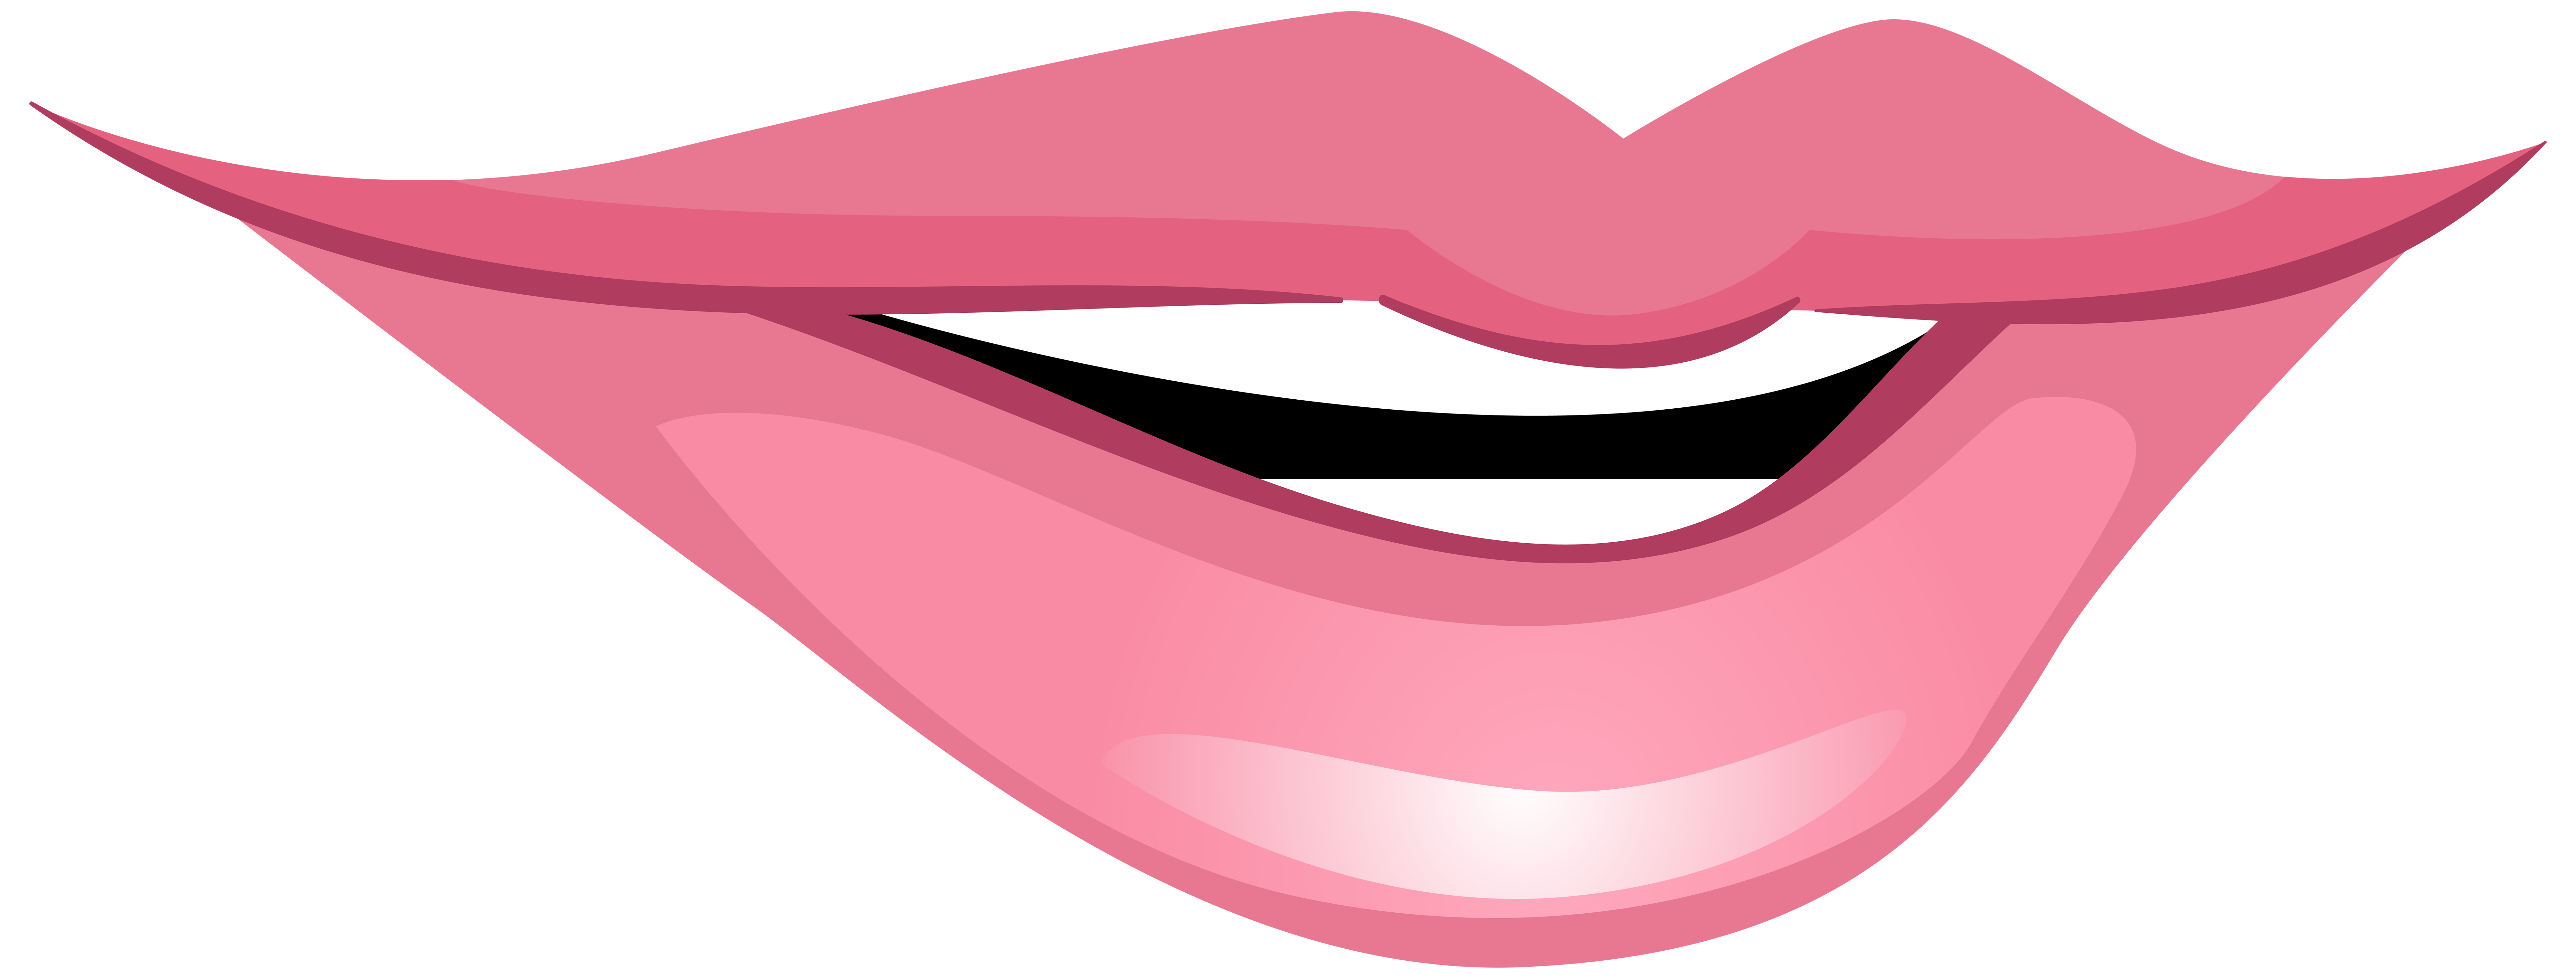 free clipart smiling lips - photo #41